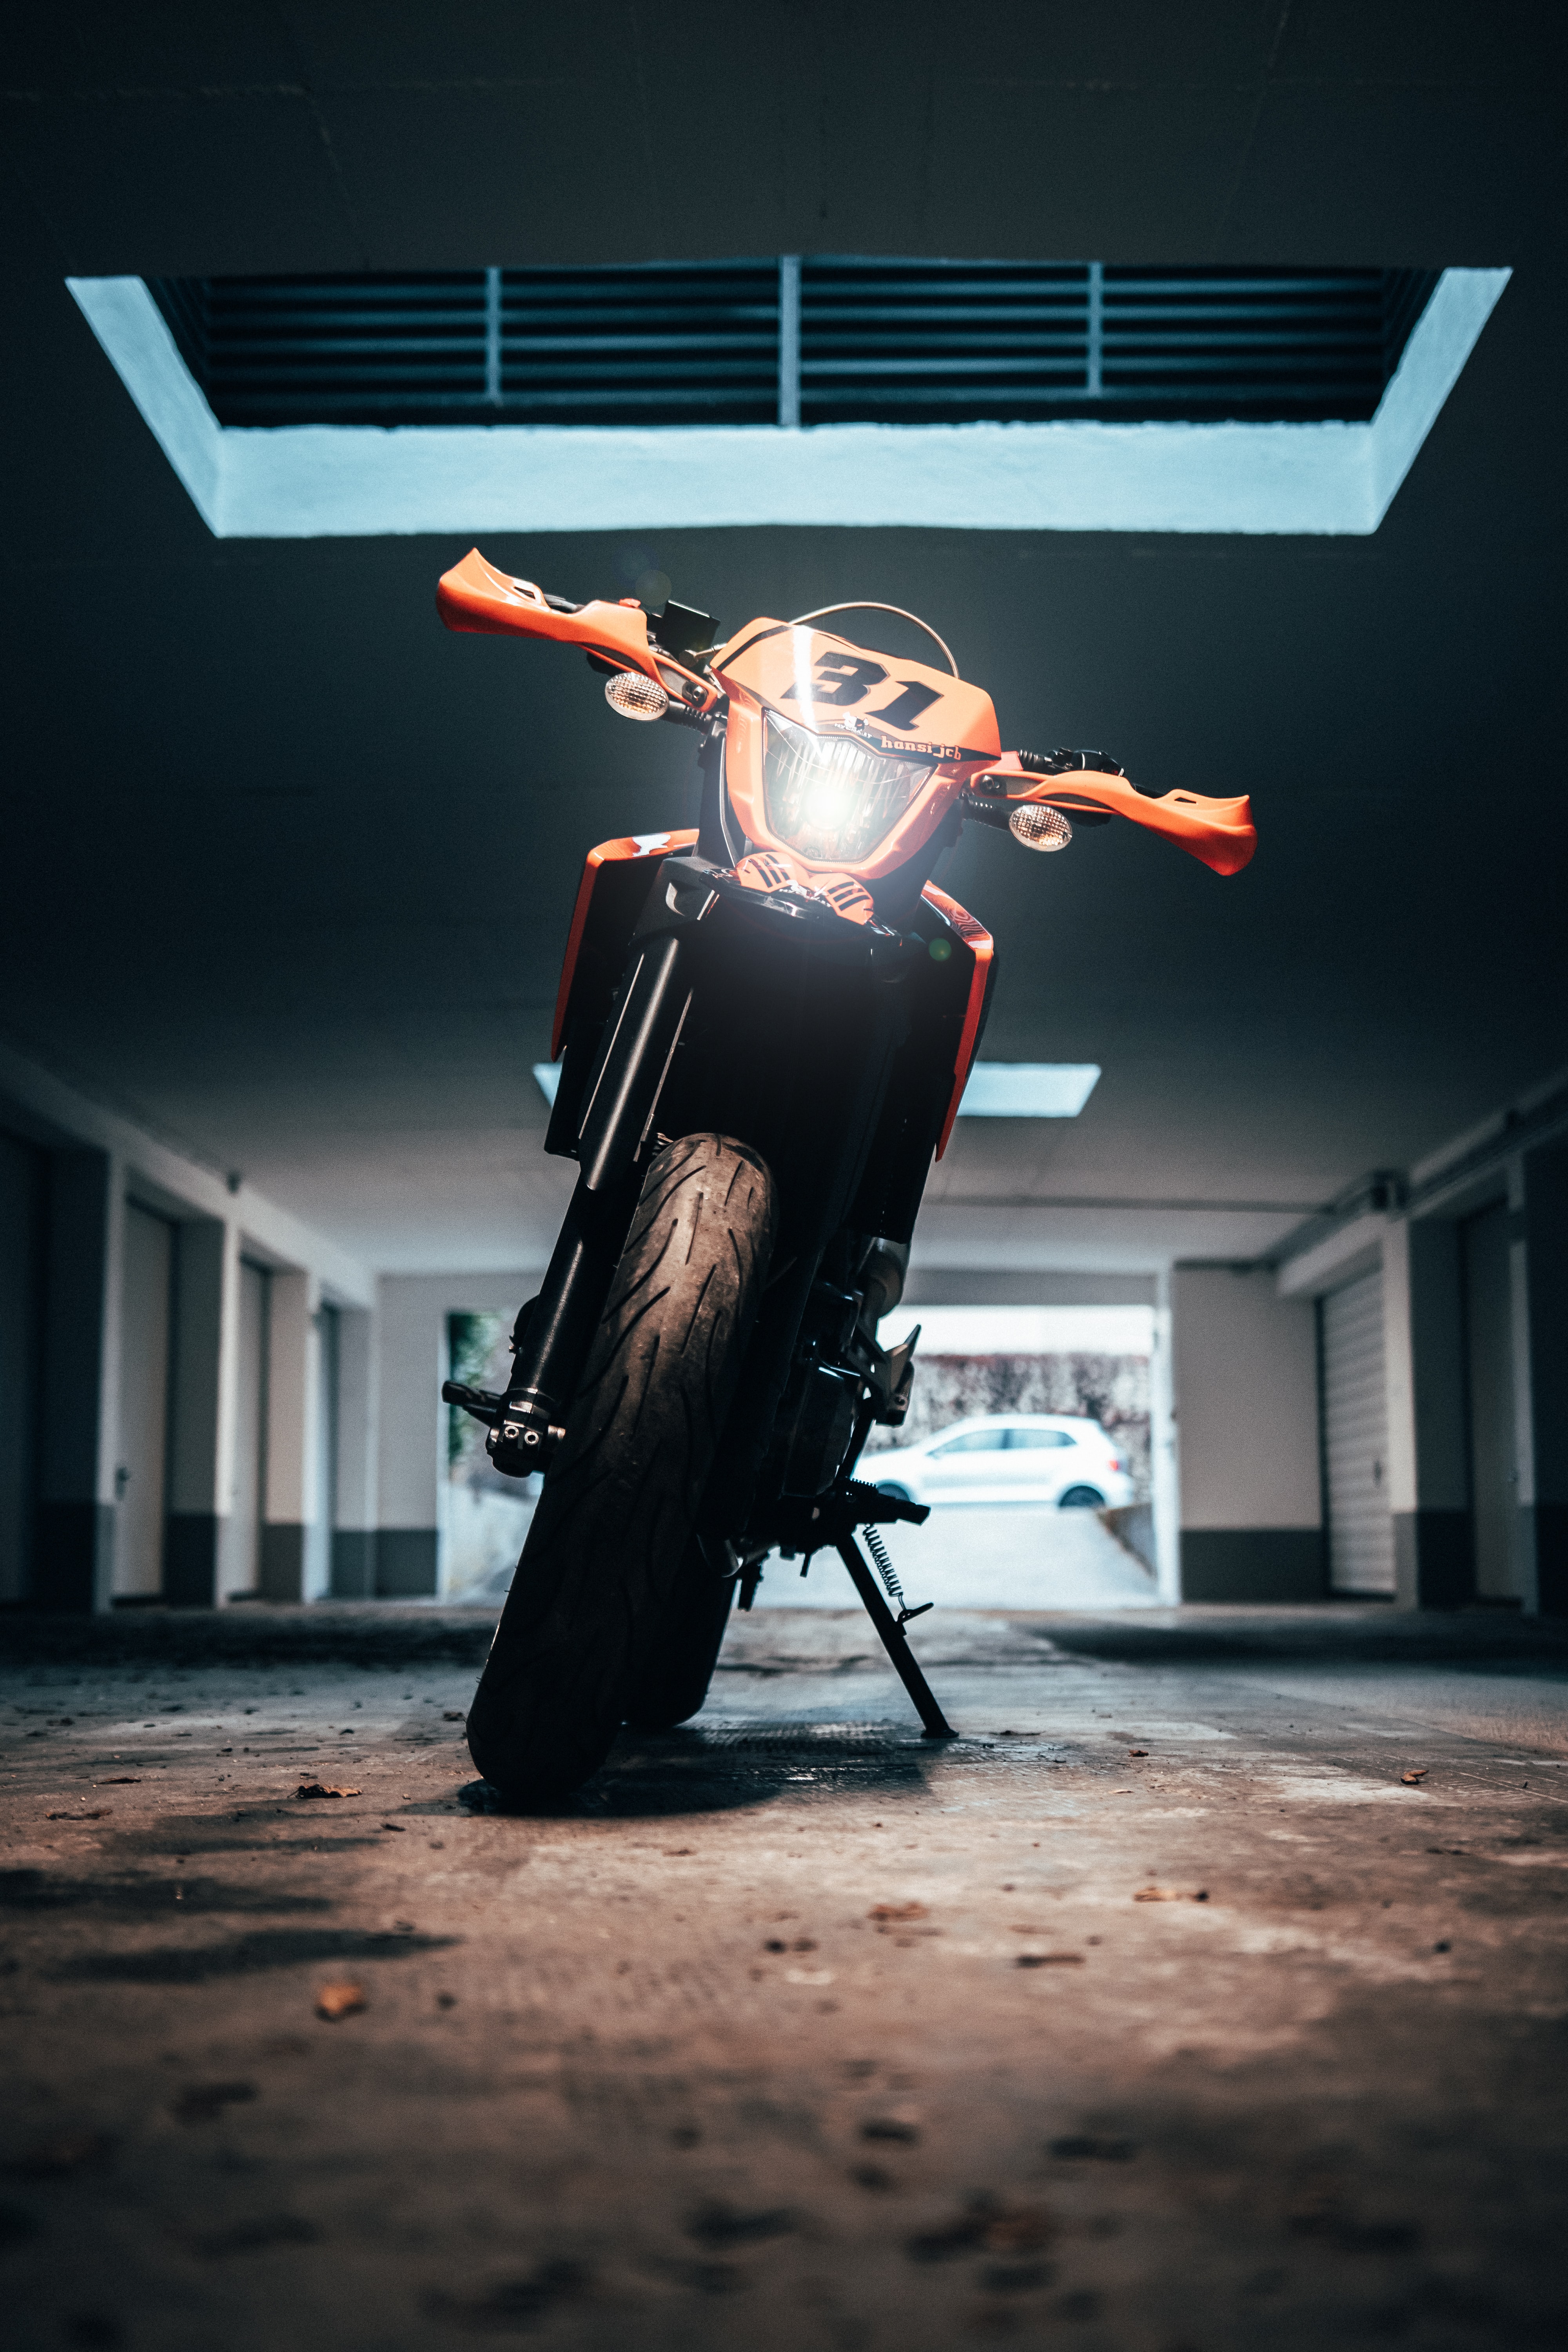 152315 free download Orange wallpapers for phone, front view, bike, motorcycles, motorcycle Orange images and screensavers for mobile